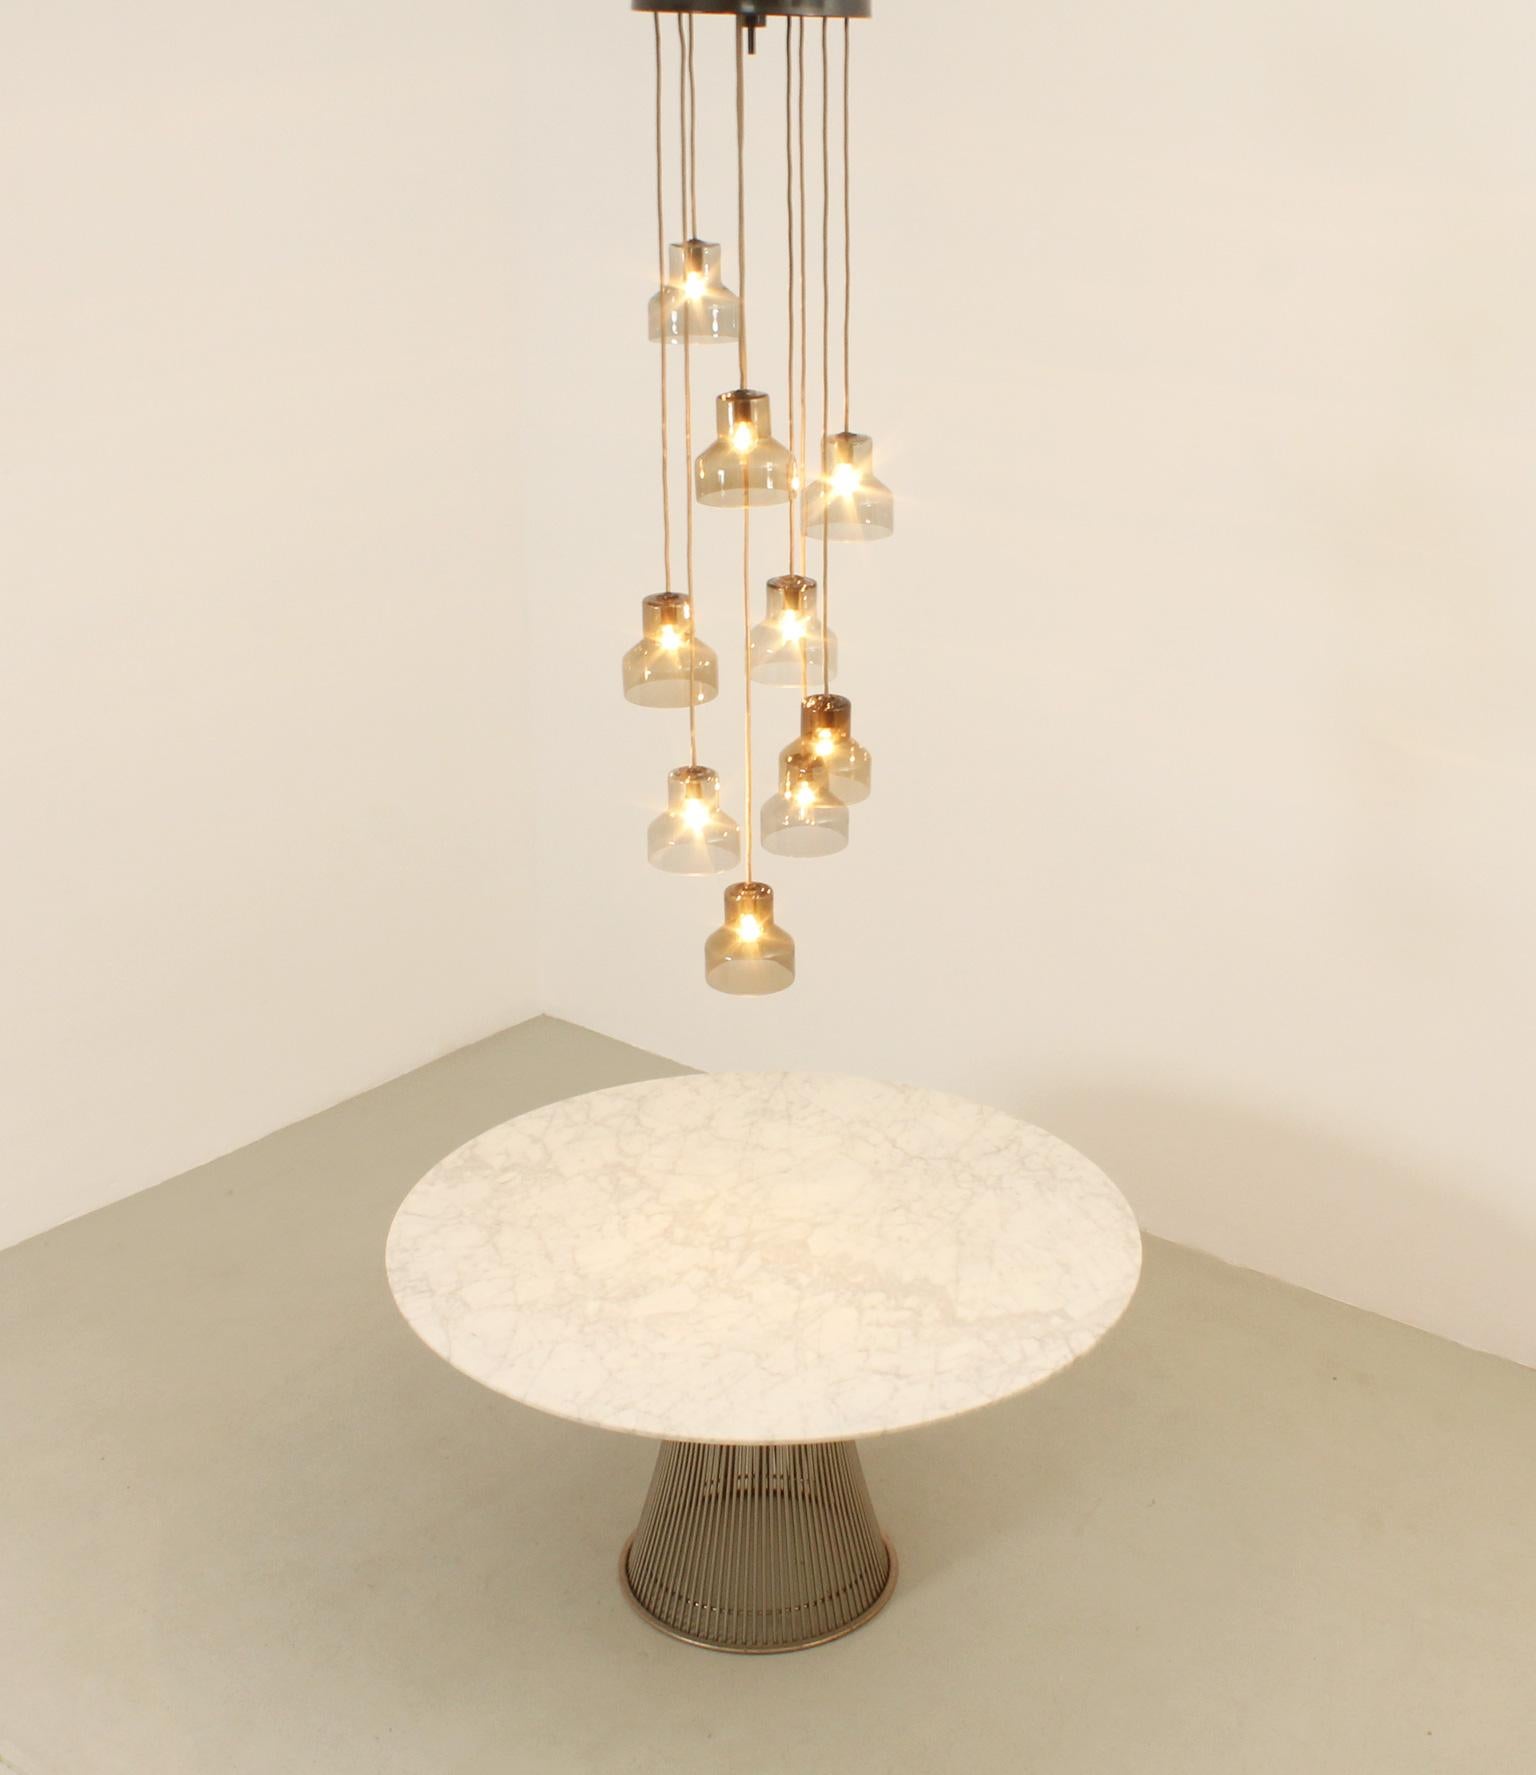 Large Cascade Ceiling Lamp by Peter Pelzel for Vistosi, Italy, 1962 For Sale 4